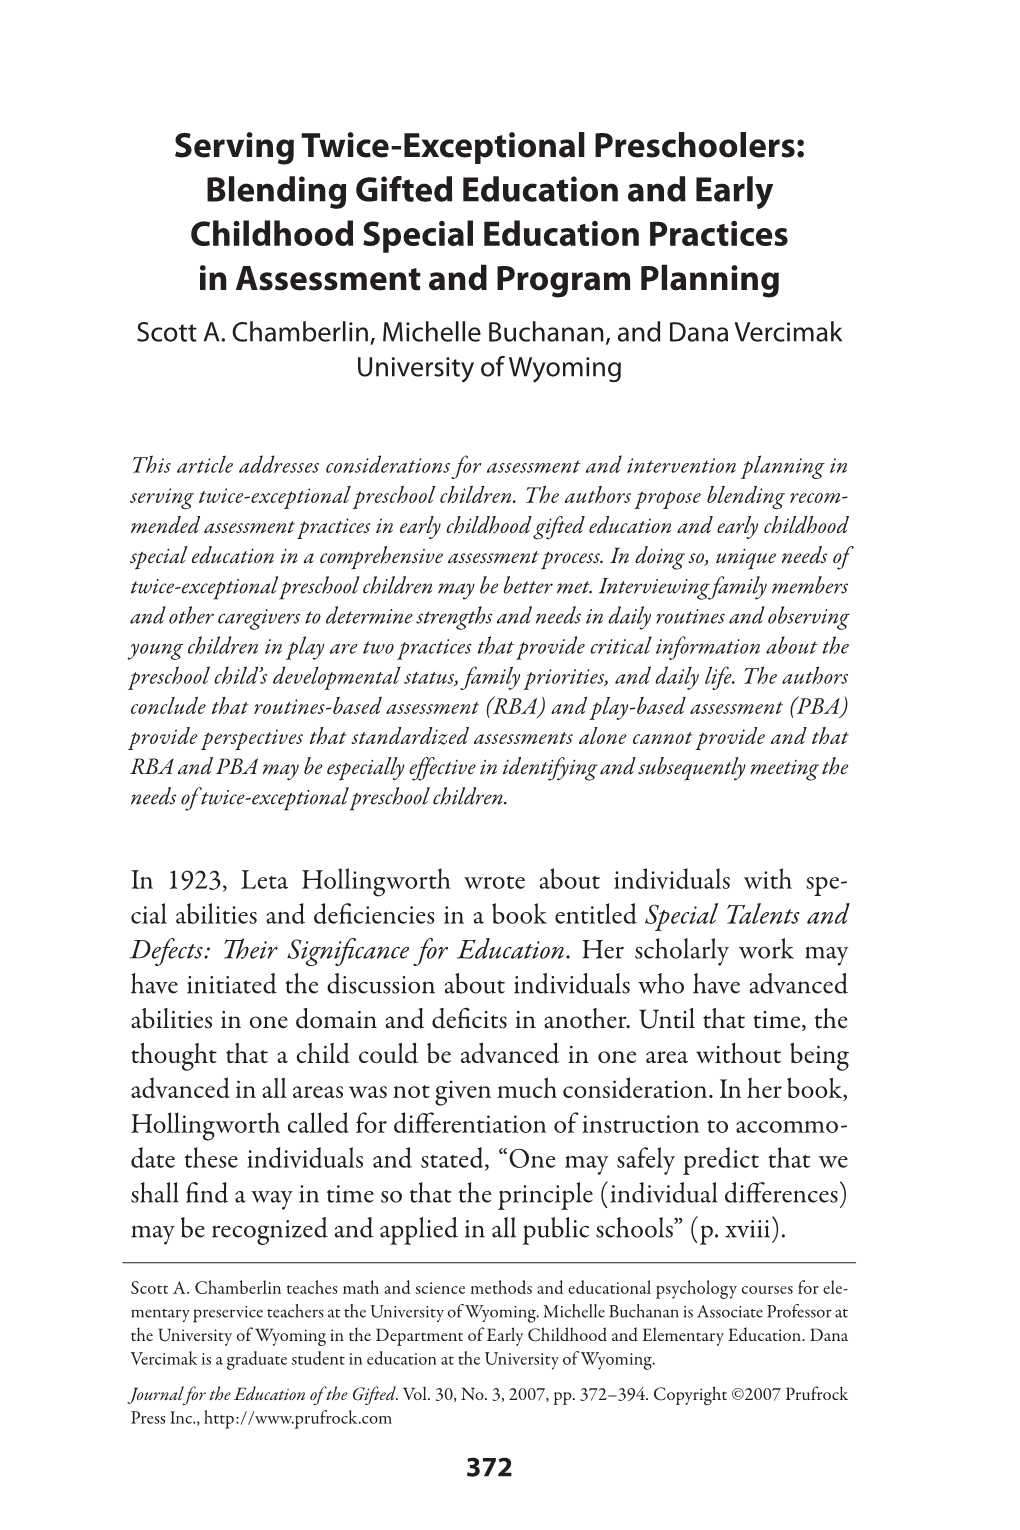 Serving Twice-Exceptional Preschoolers: Blending Gifted Education and Early Childhood Special Education Practices in Assessment and Program Planning Scott A